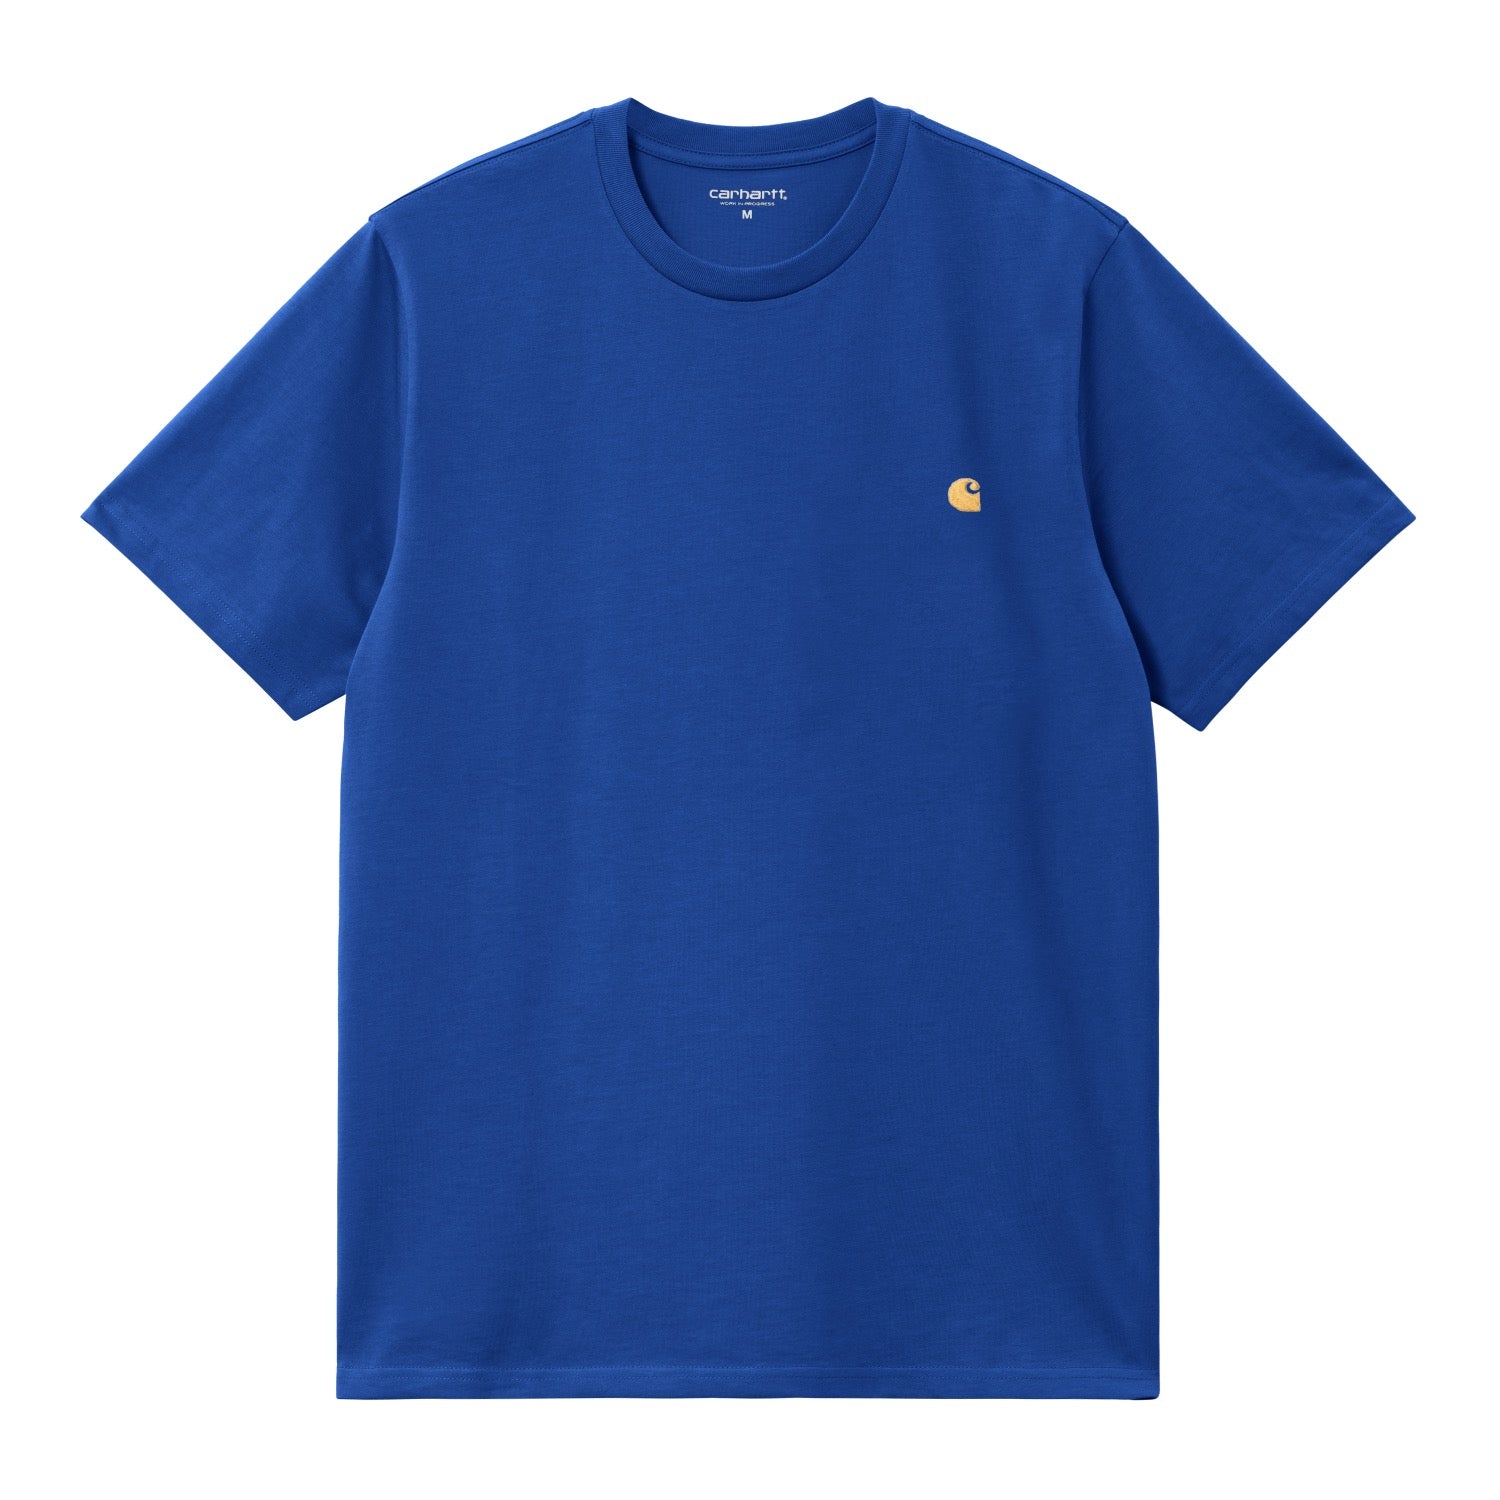 S/S CHASE T-SHIRT - Acapulco / Gold